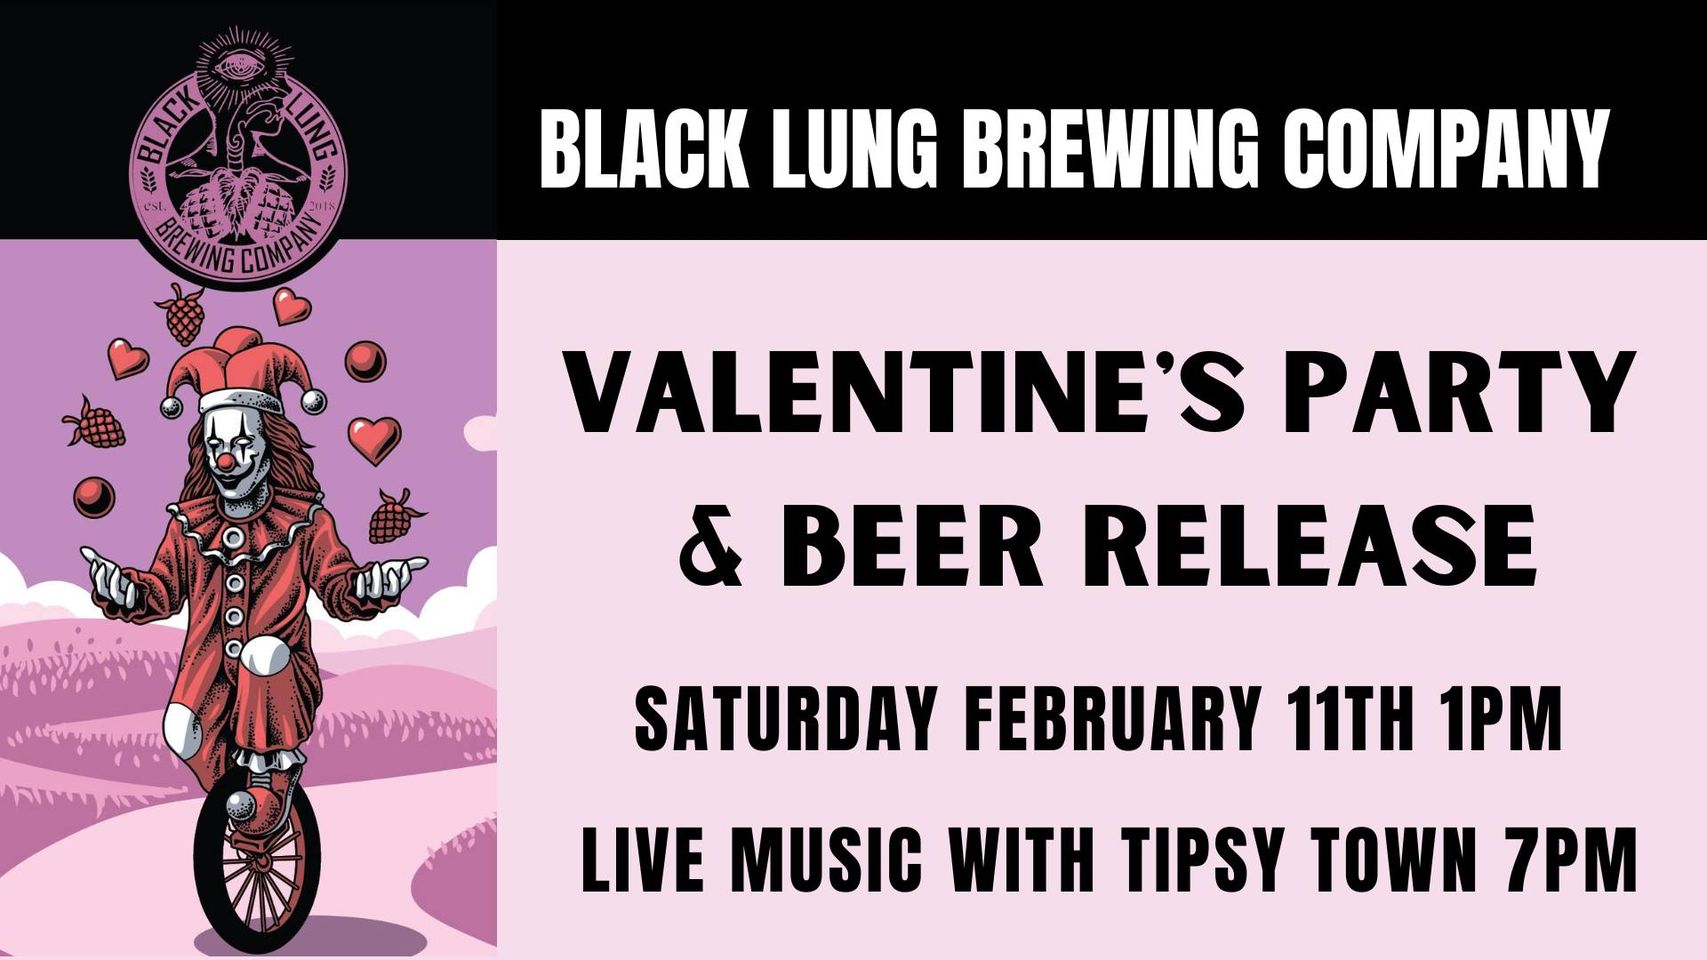 Valentine's Party & Beer Release at Black Lung